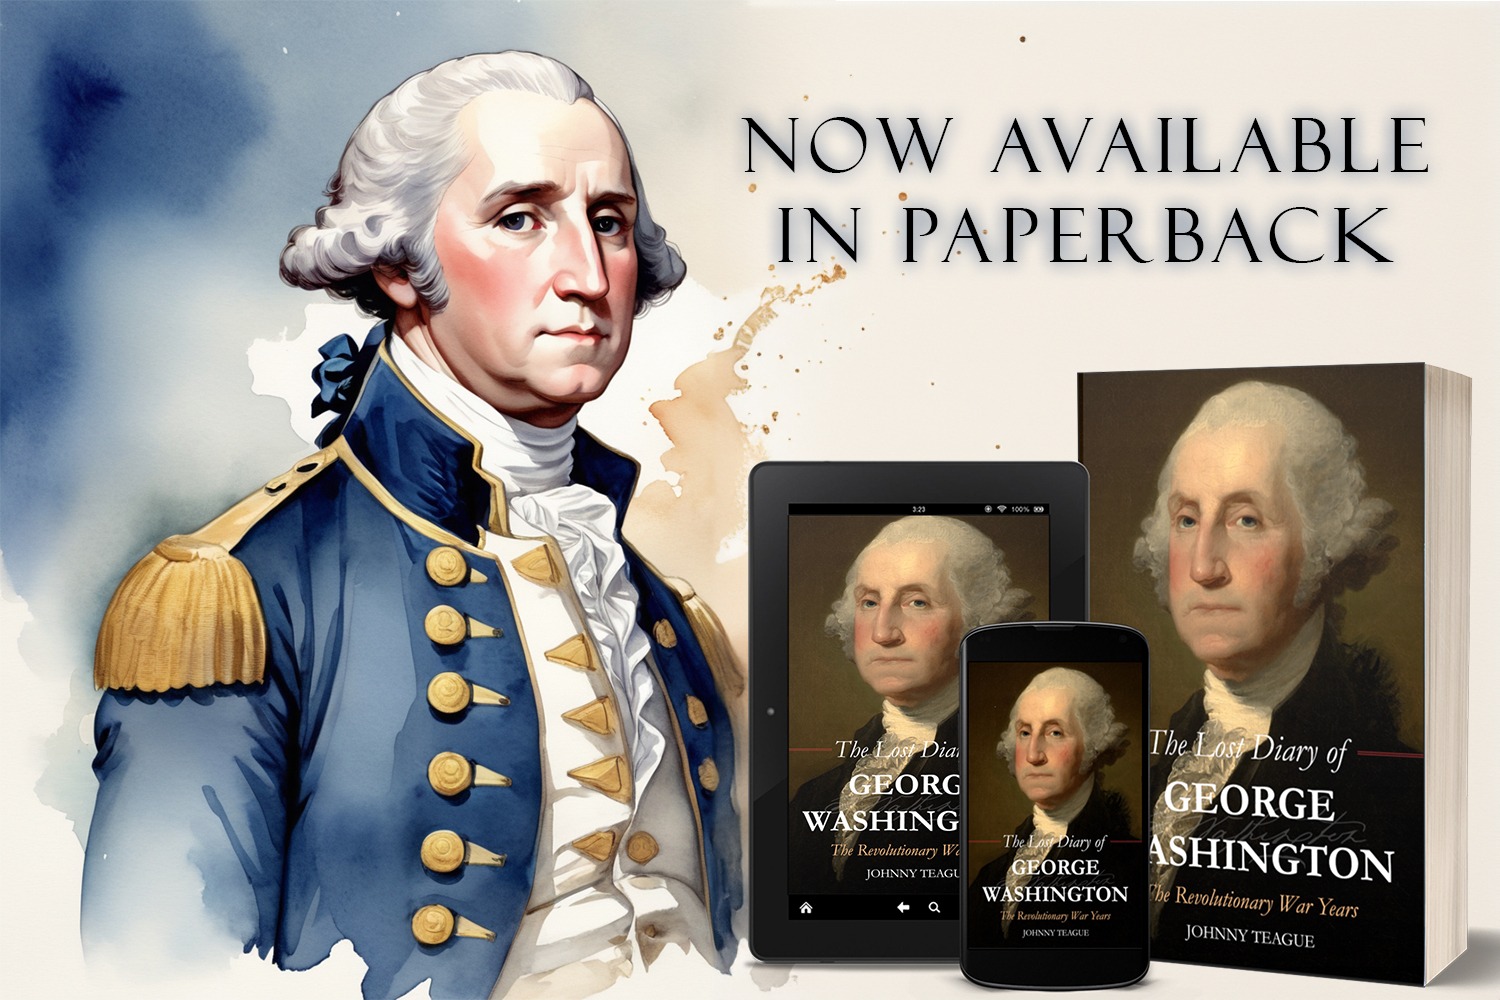 The Lost Diary of George Washington by Johnny Teague, now available from Histria Books